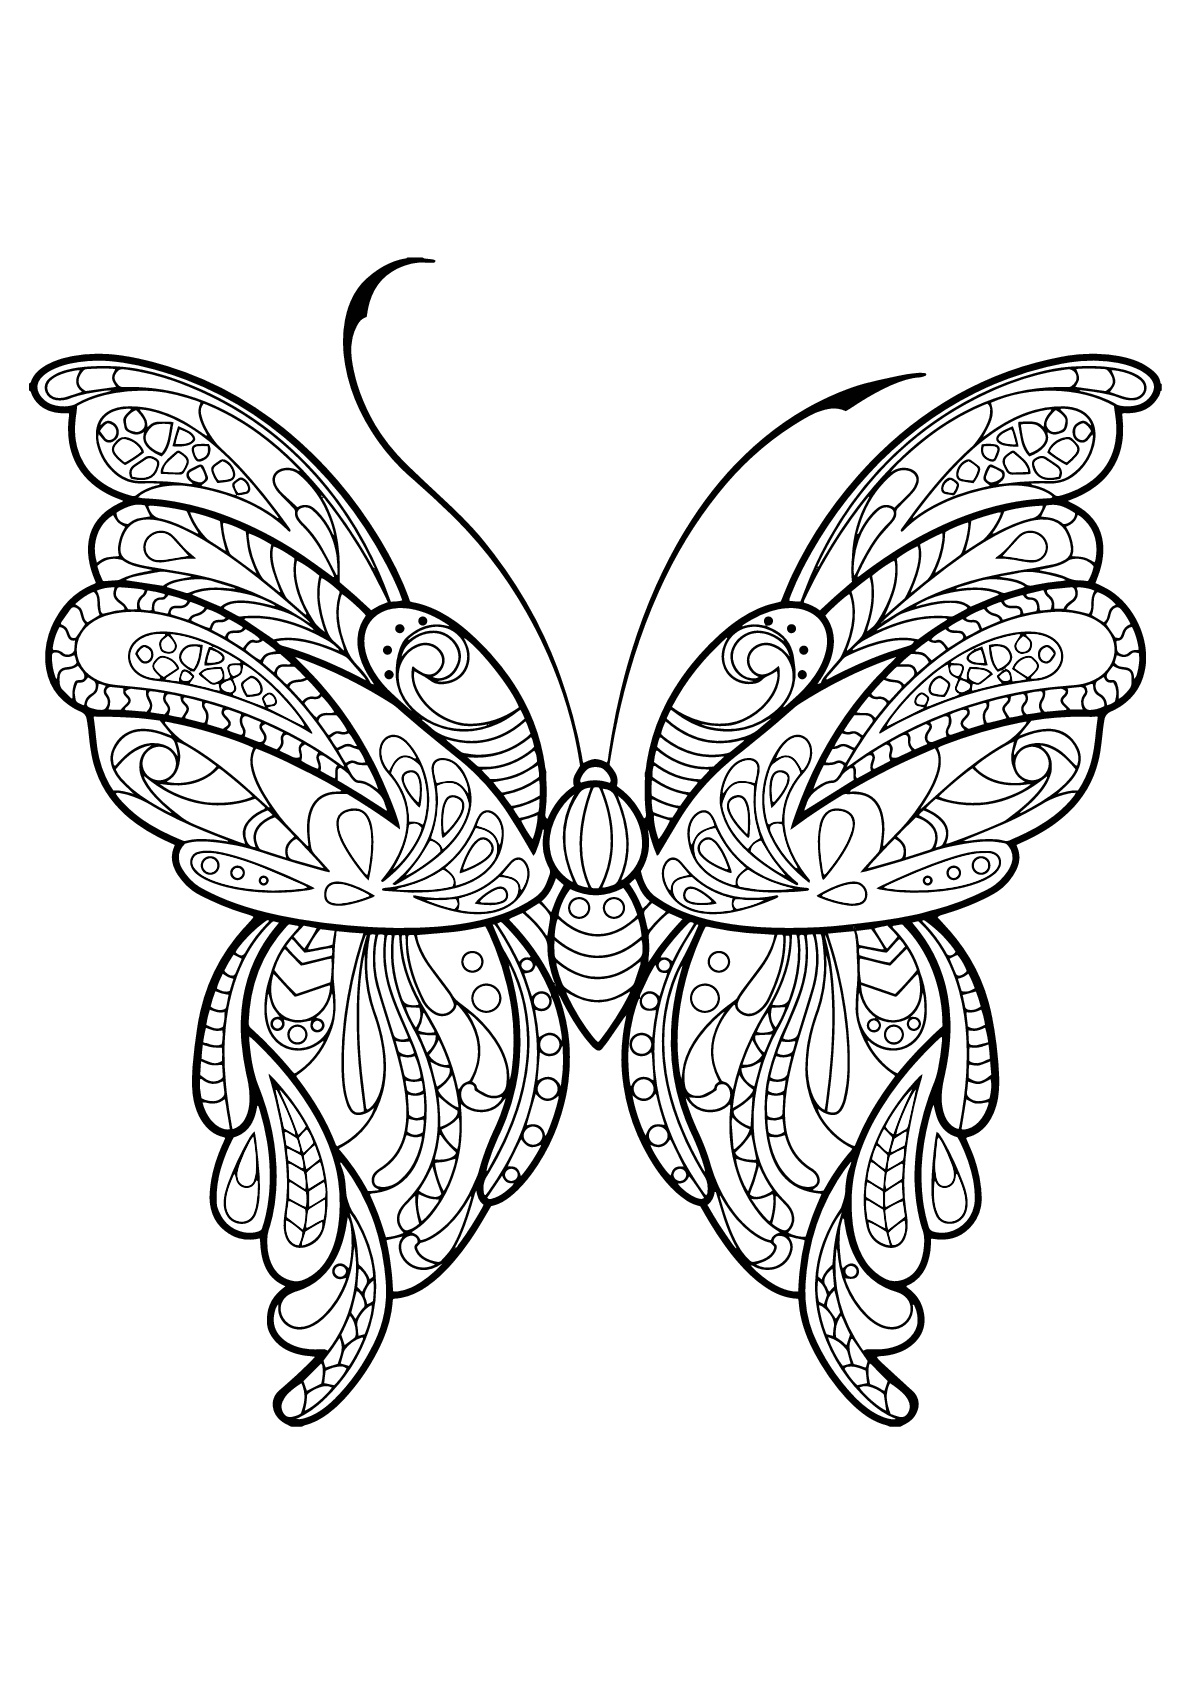 Butterflies free to color for kids - Butterflies Kids Coloring Pages